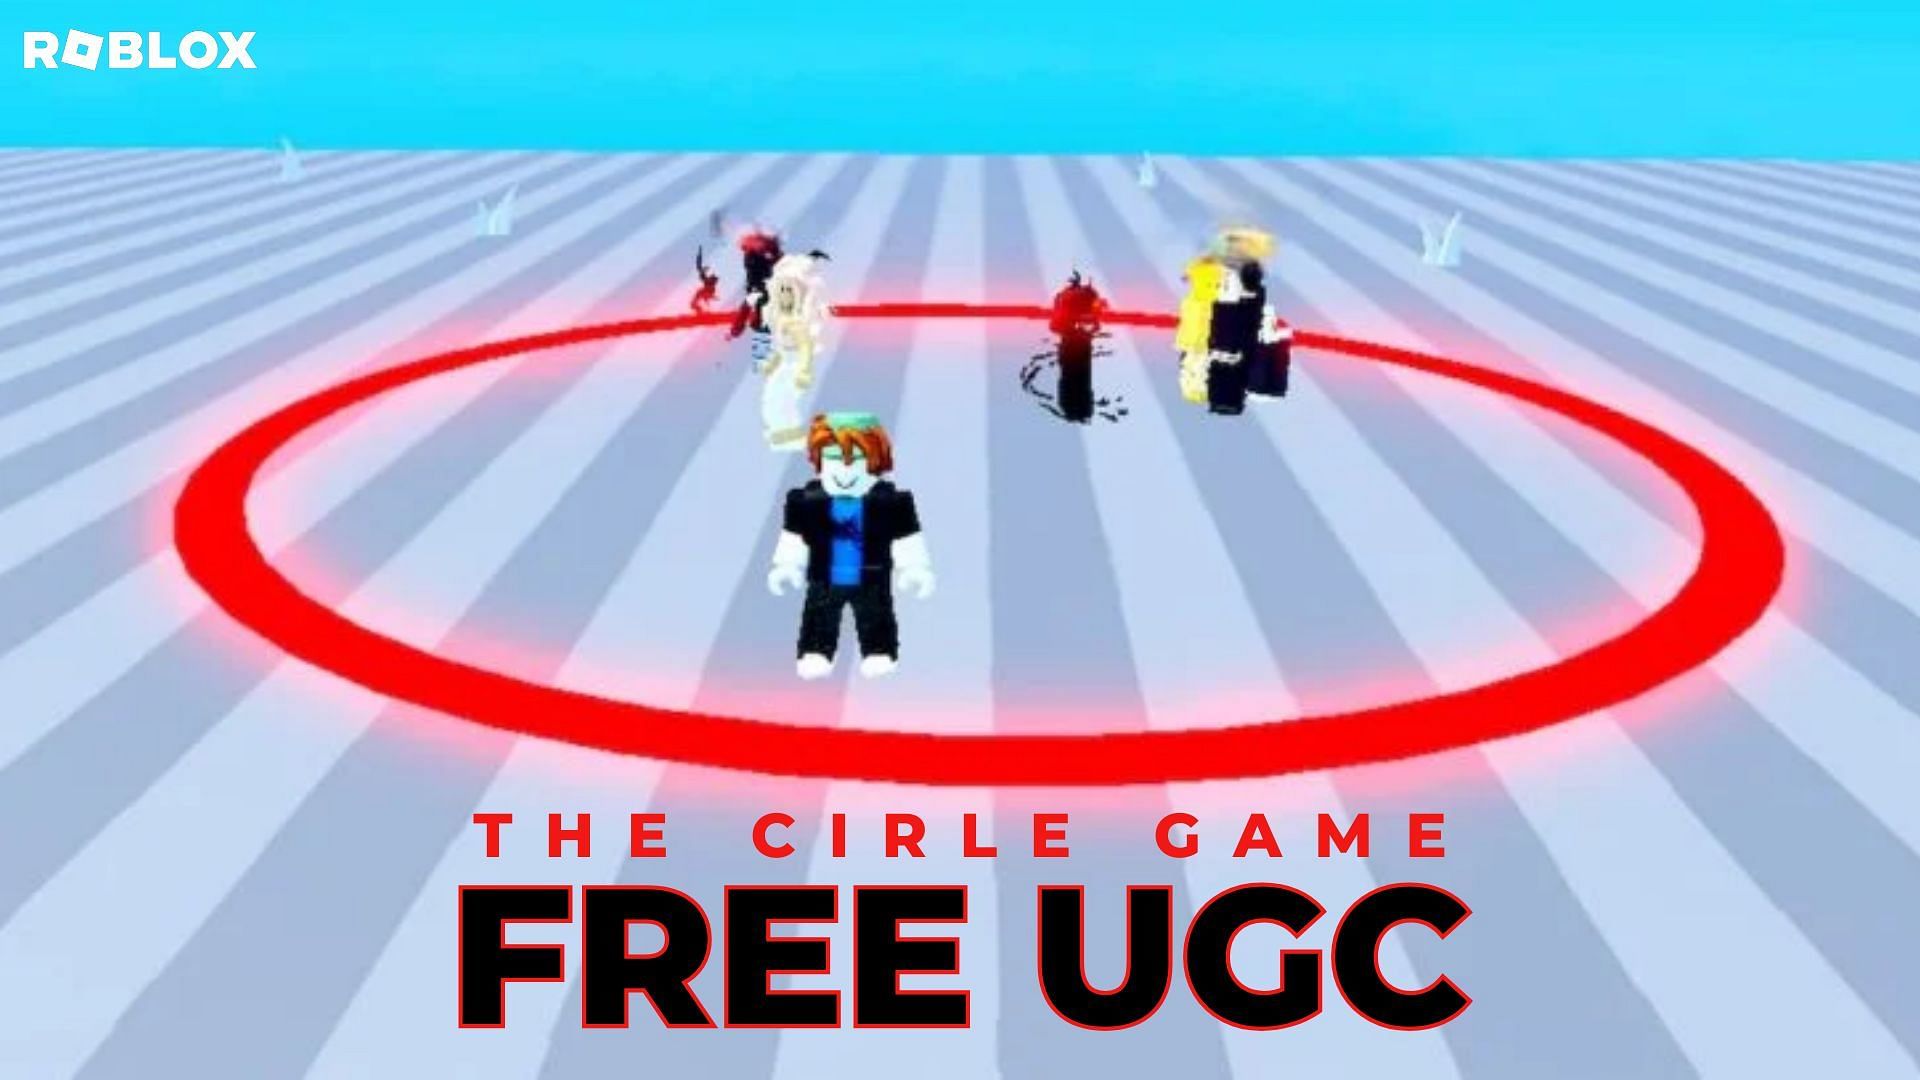 These are all the free UGCs you can get in The Circle Game (Image via Roblox)